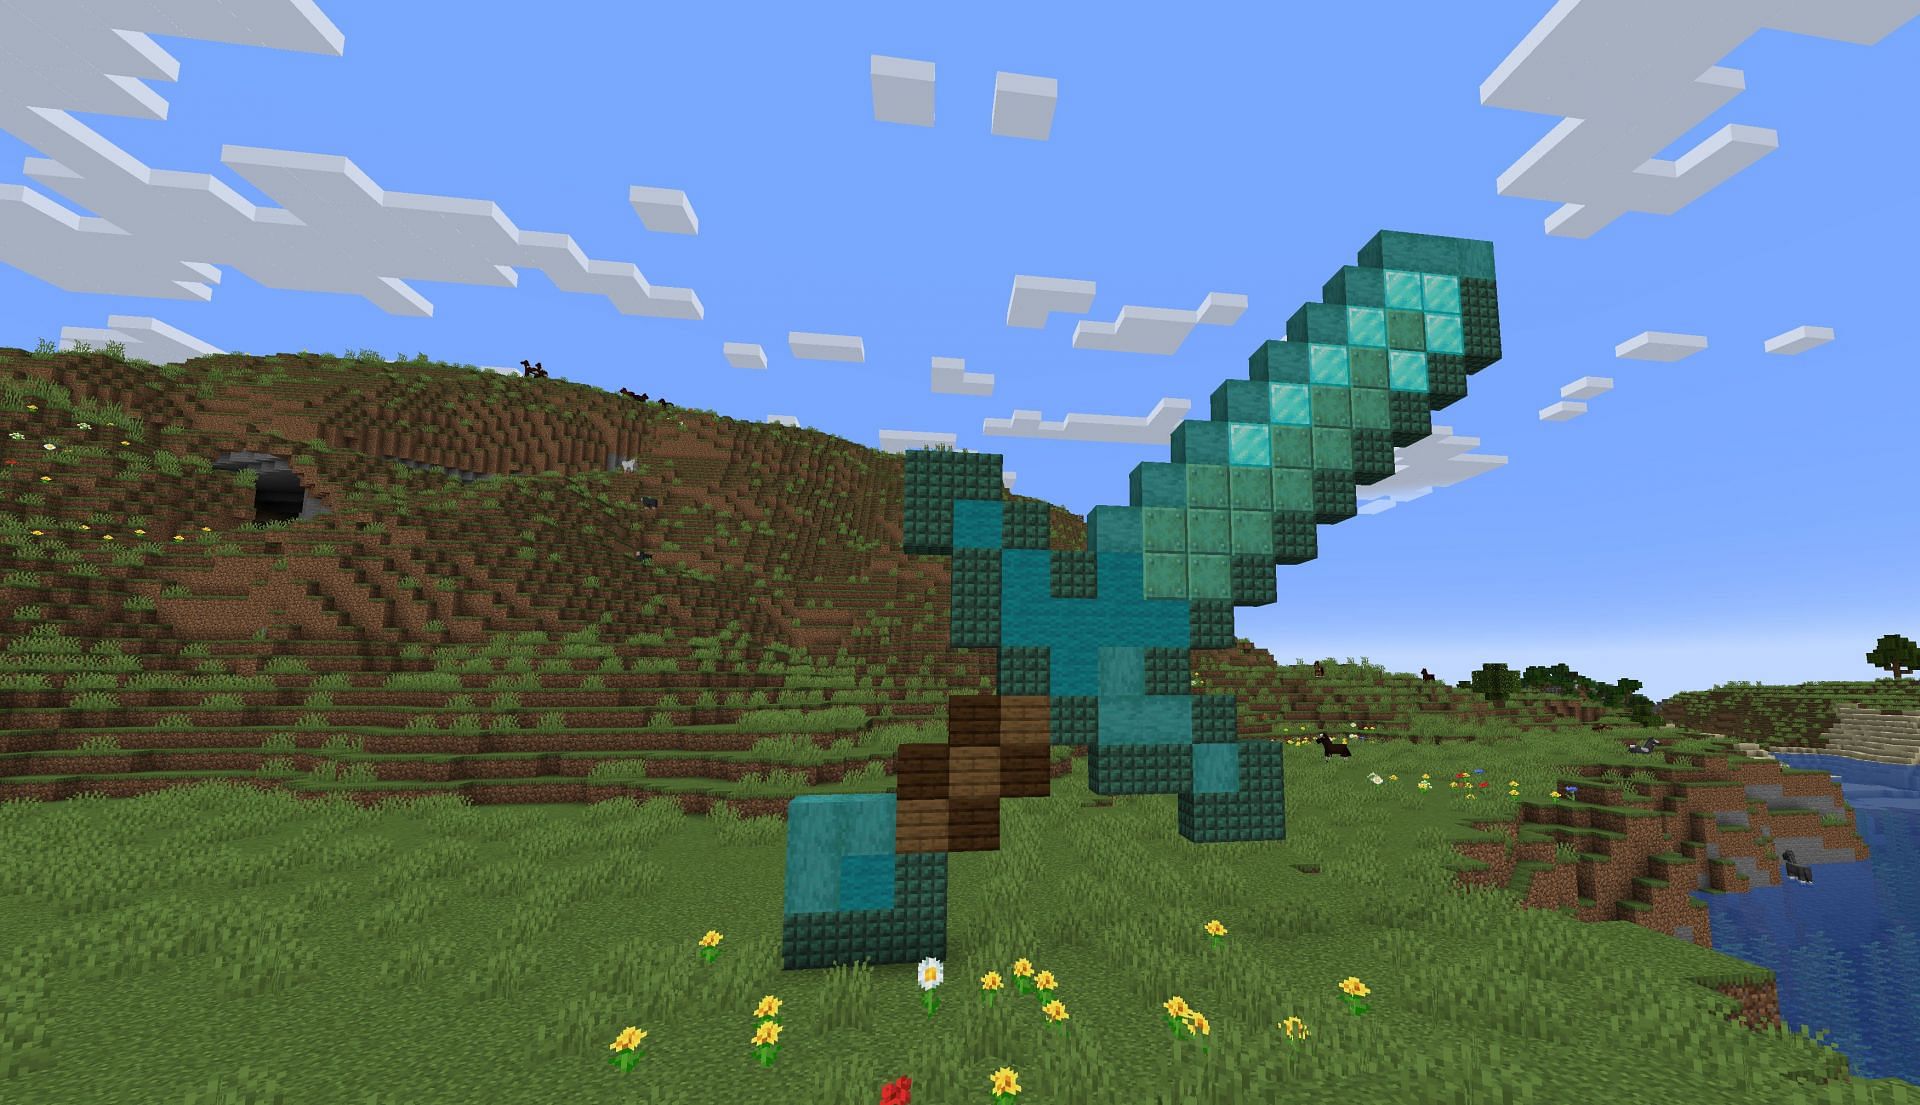 An example pixel art in the game (Image via Minecraft)